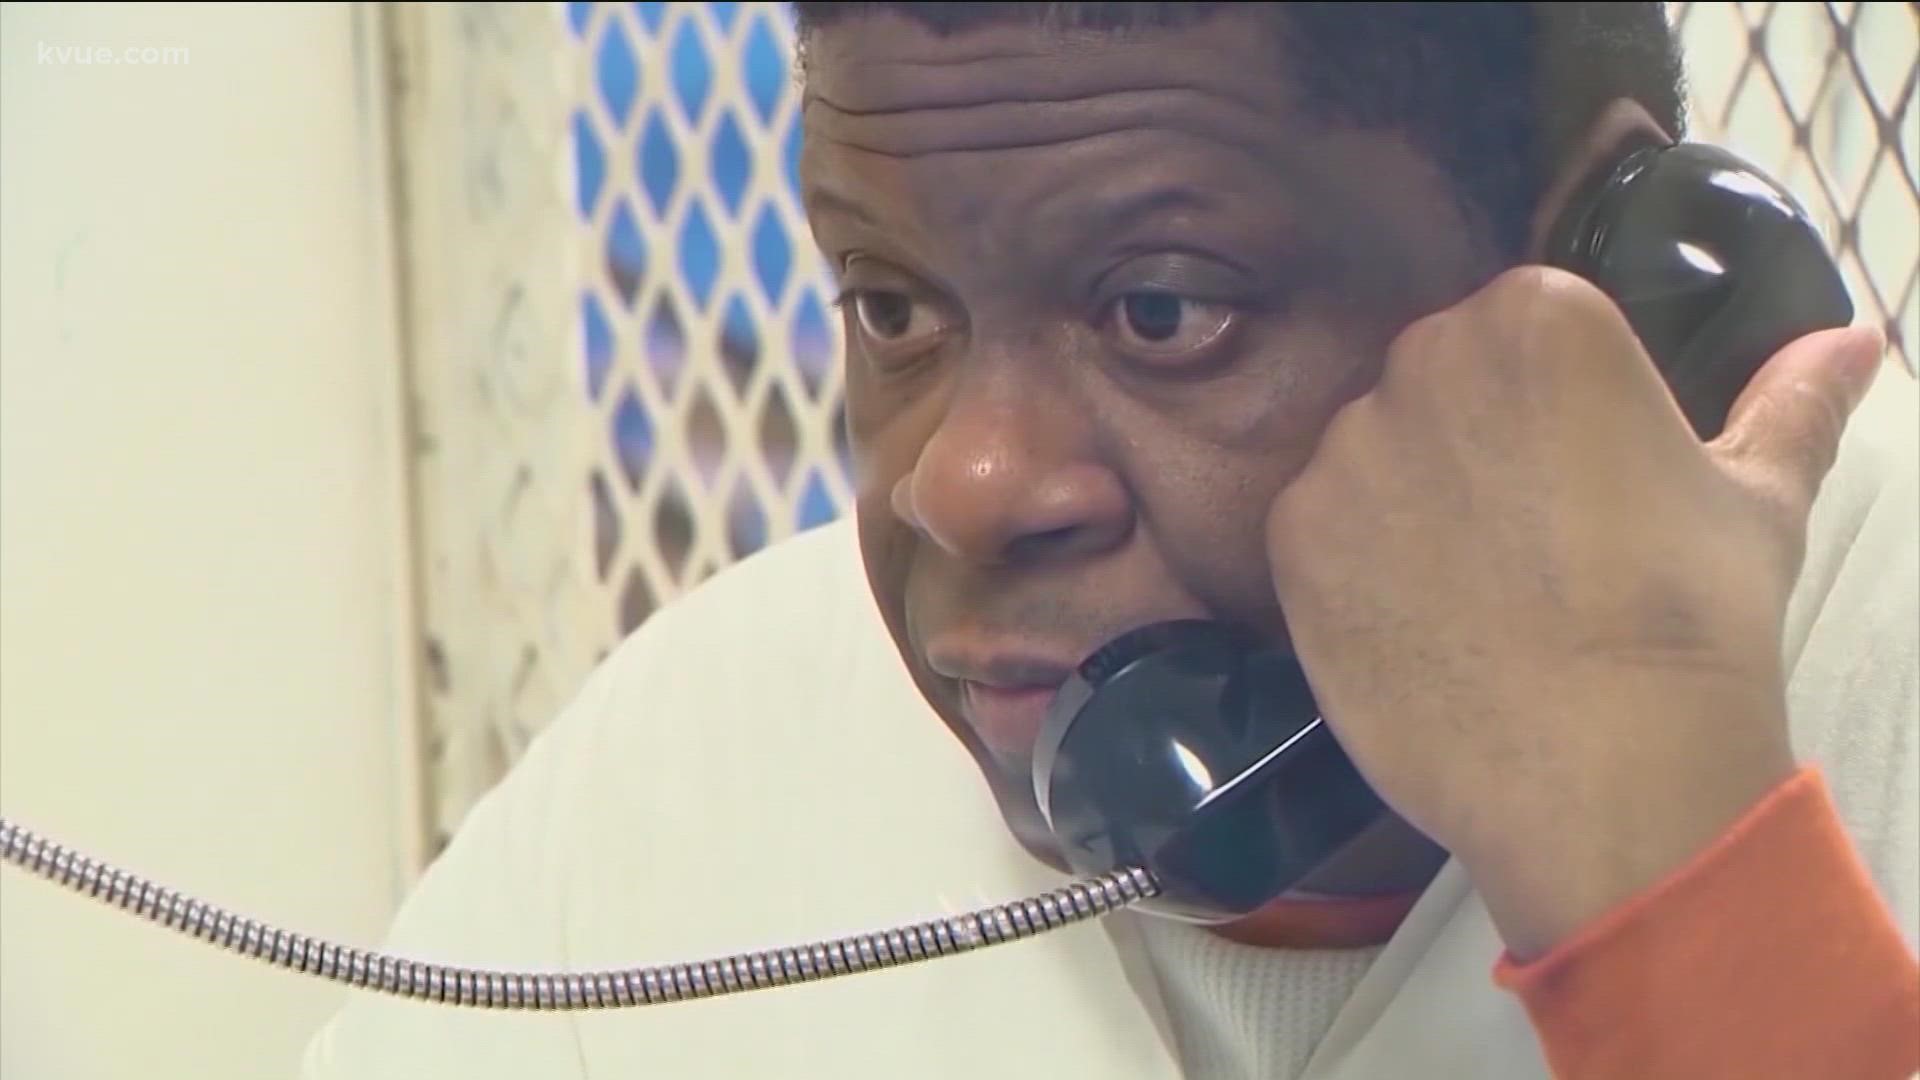 The U.S. Supreme Court has denied an attempt by Texas death row inmate Rodney Reed to get a new trial.